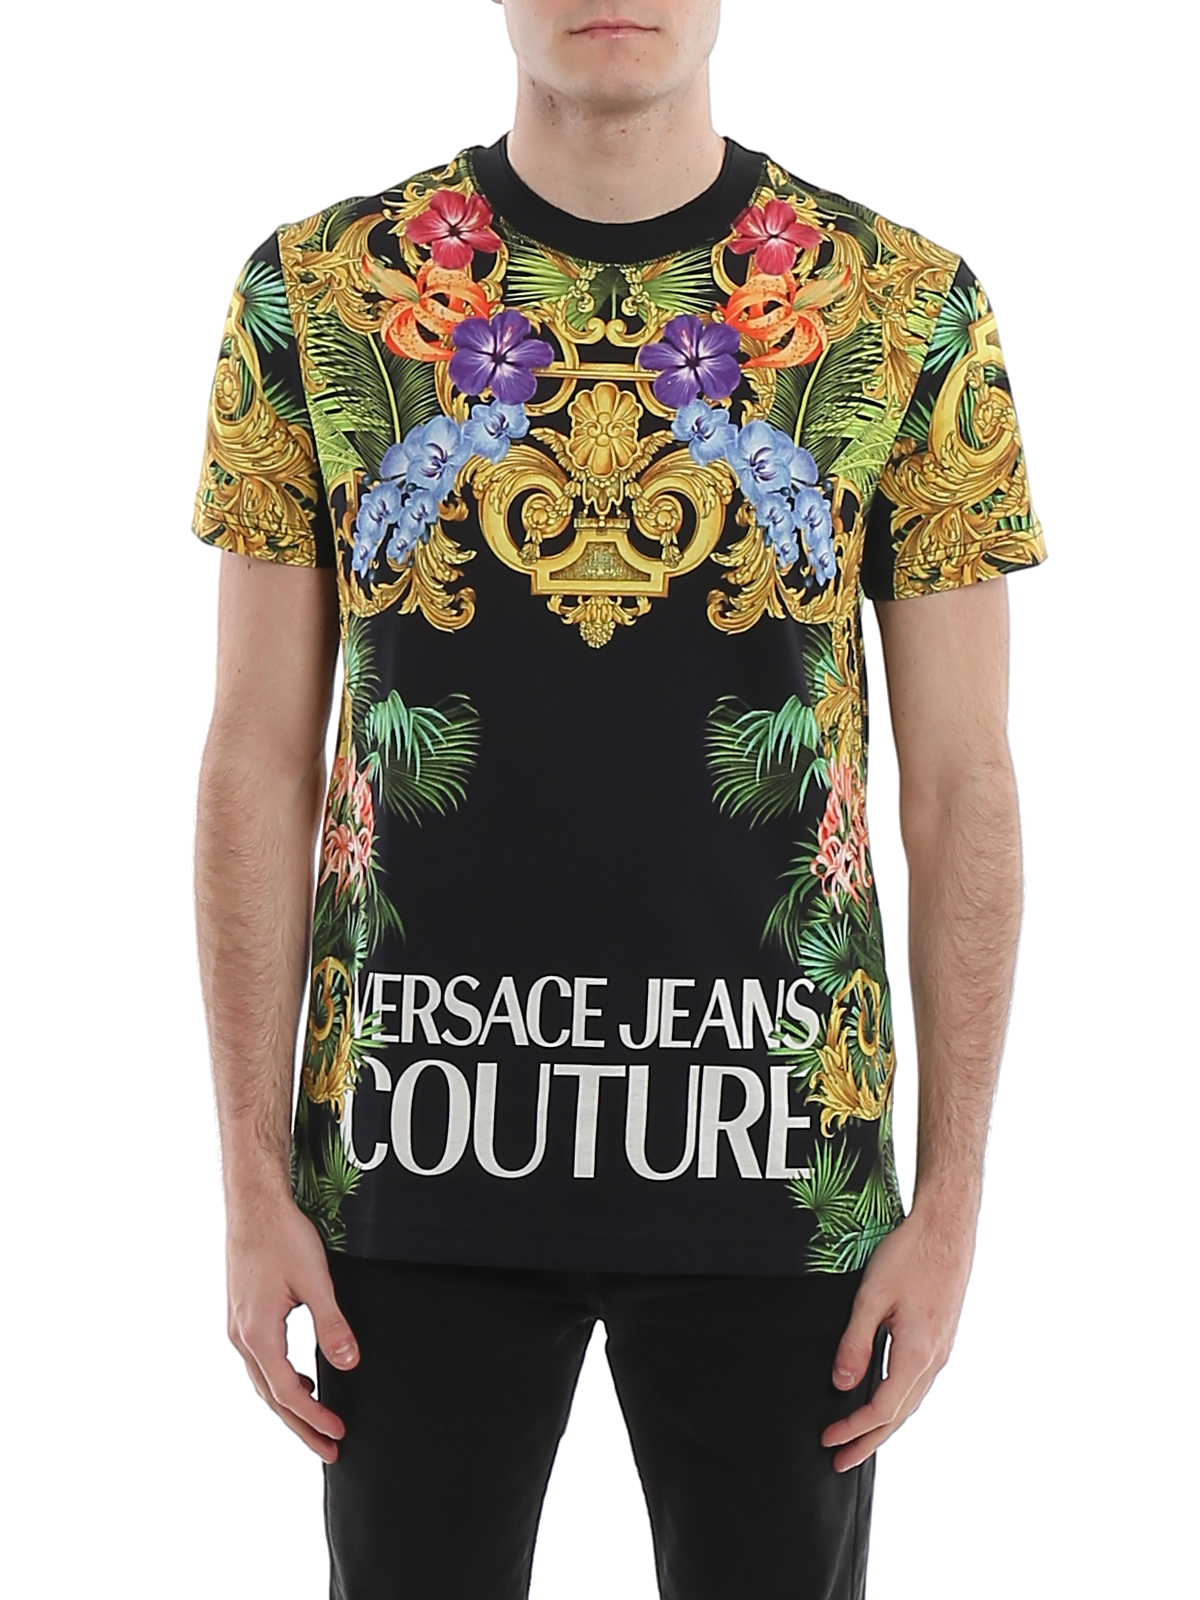 versace jeans t shirt price